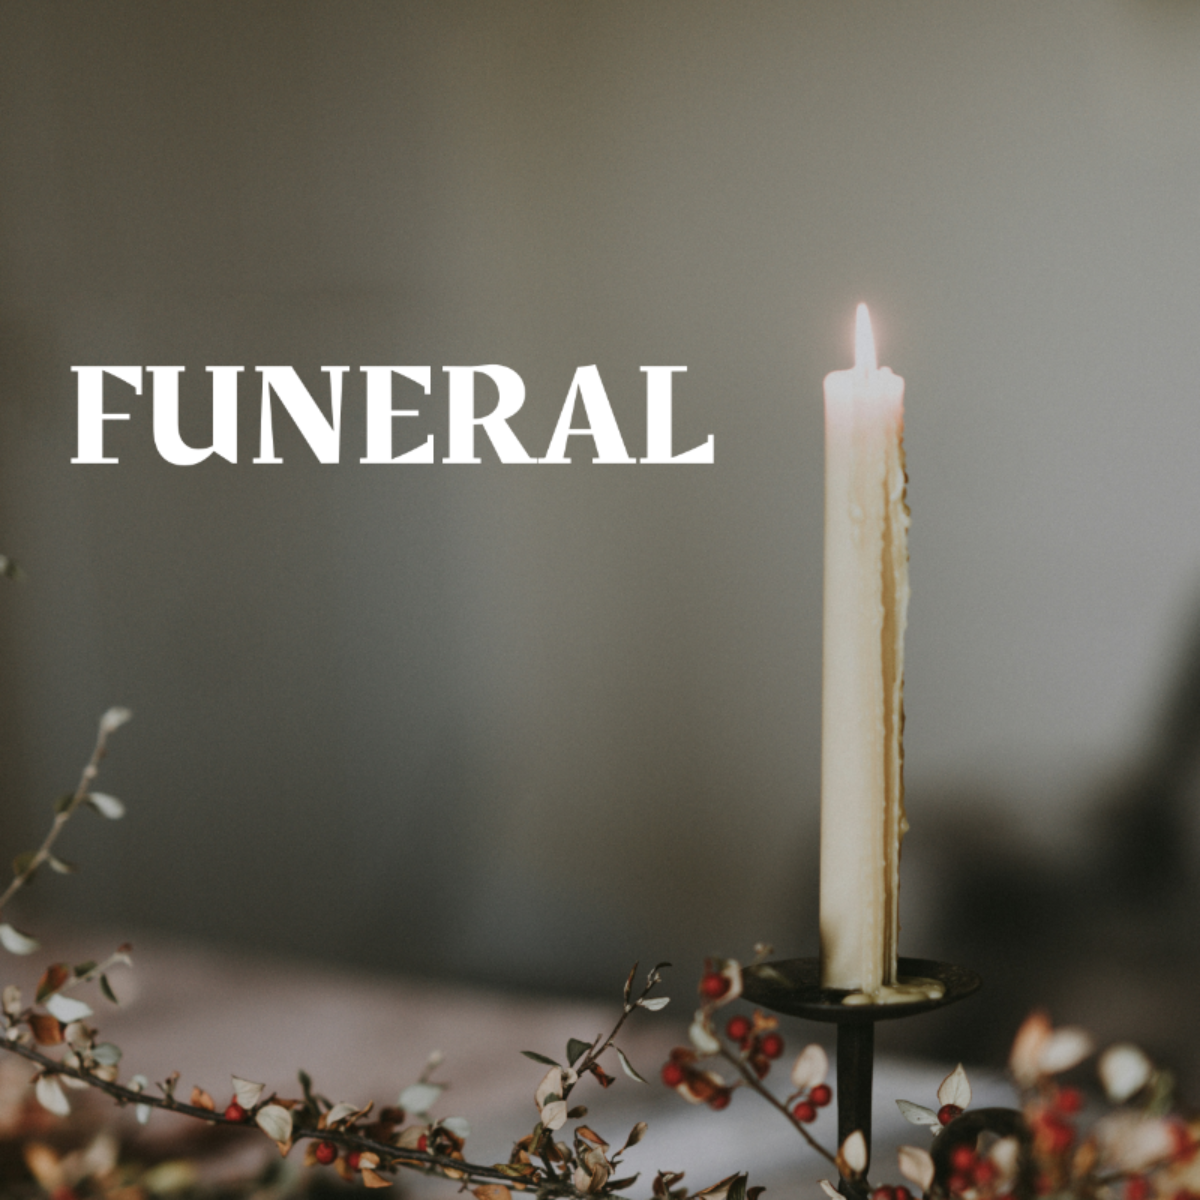 Funeral Itinerary Template